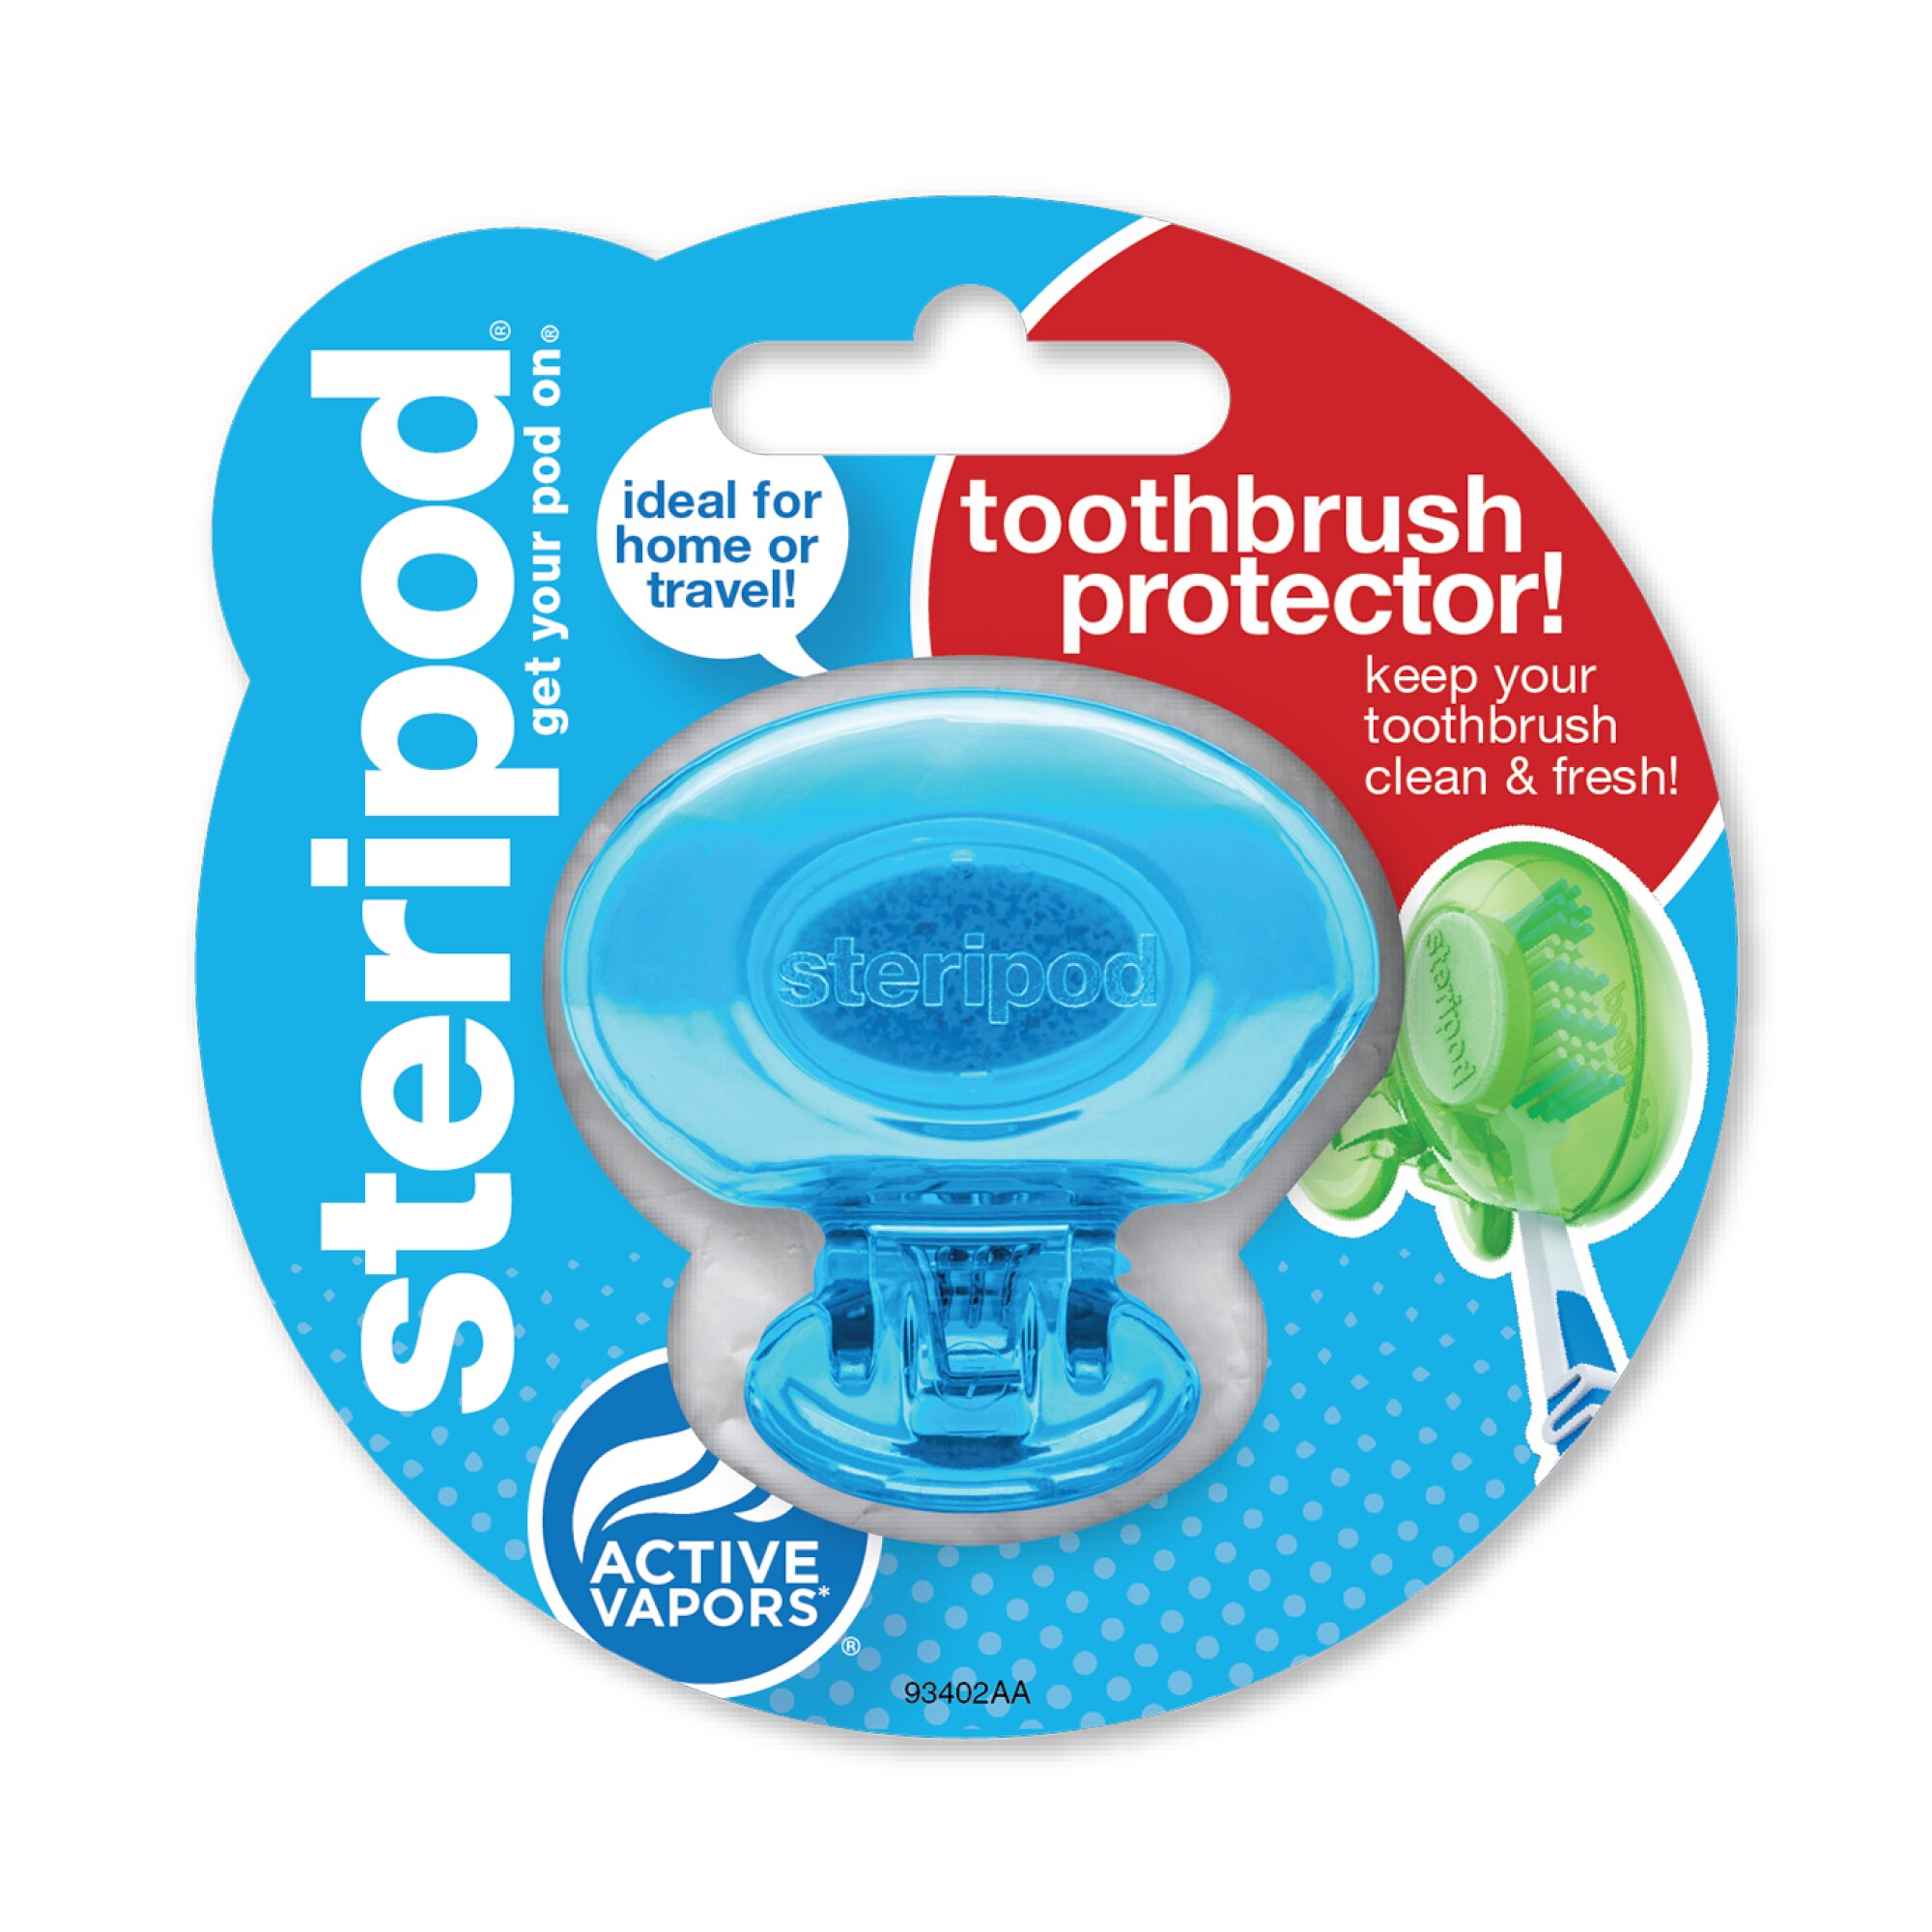 Steripod Toothbrush Protector, 1 CT